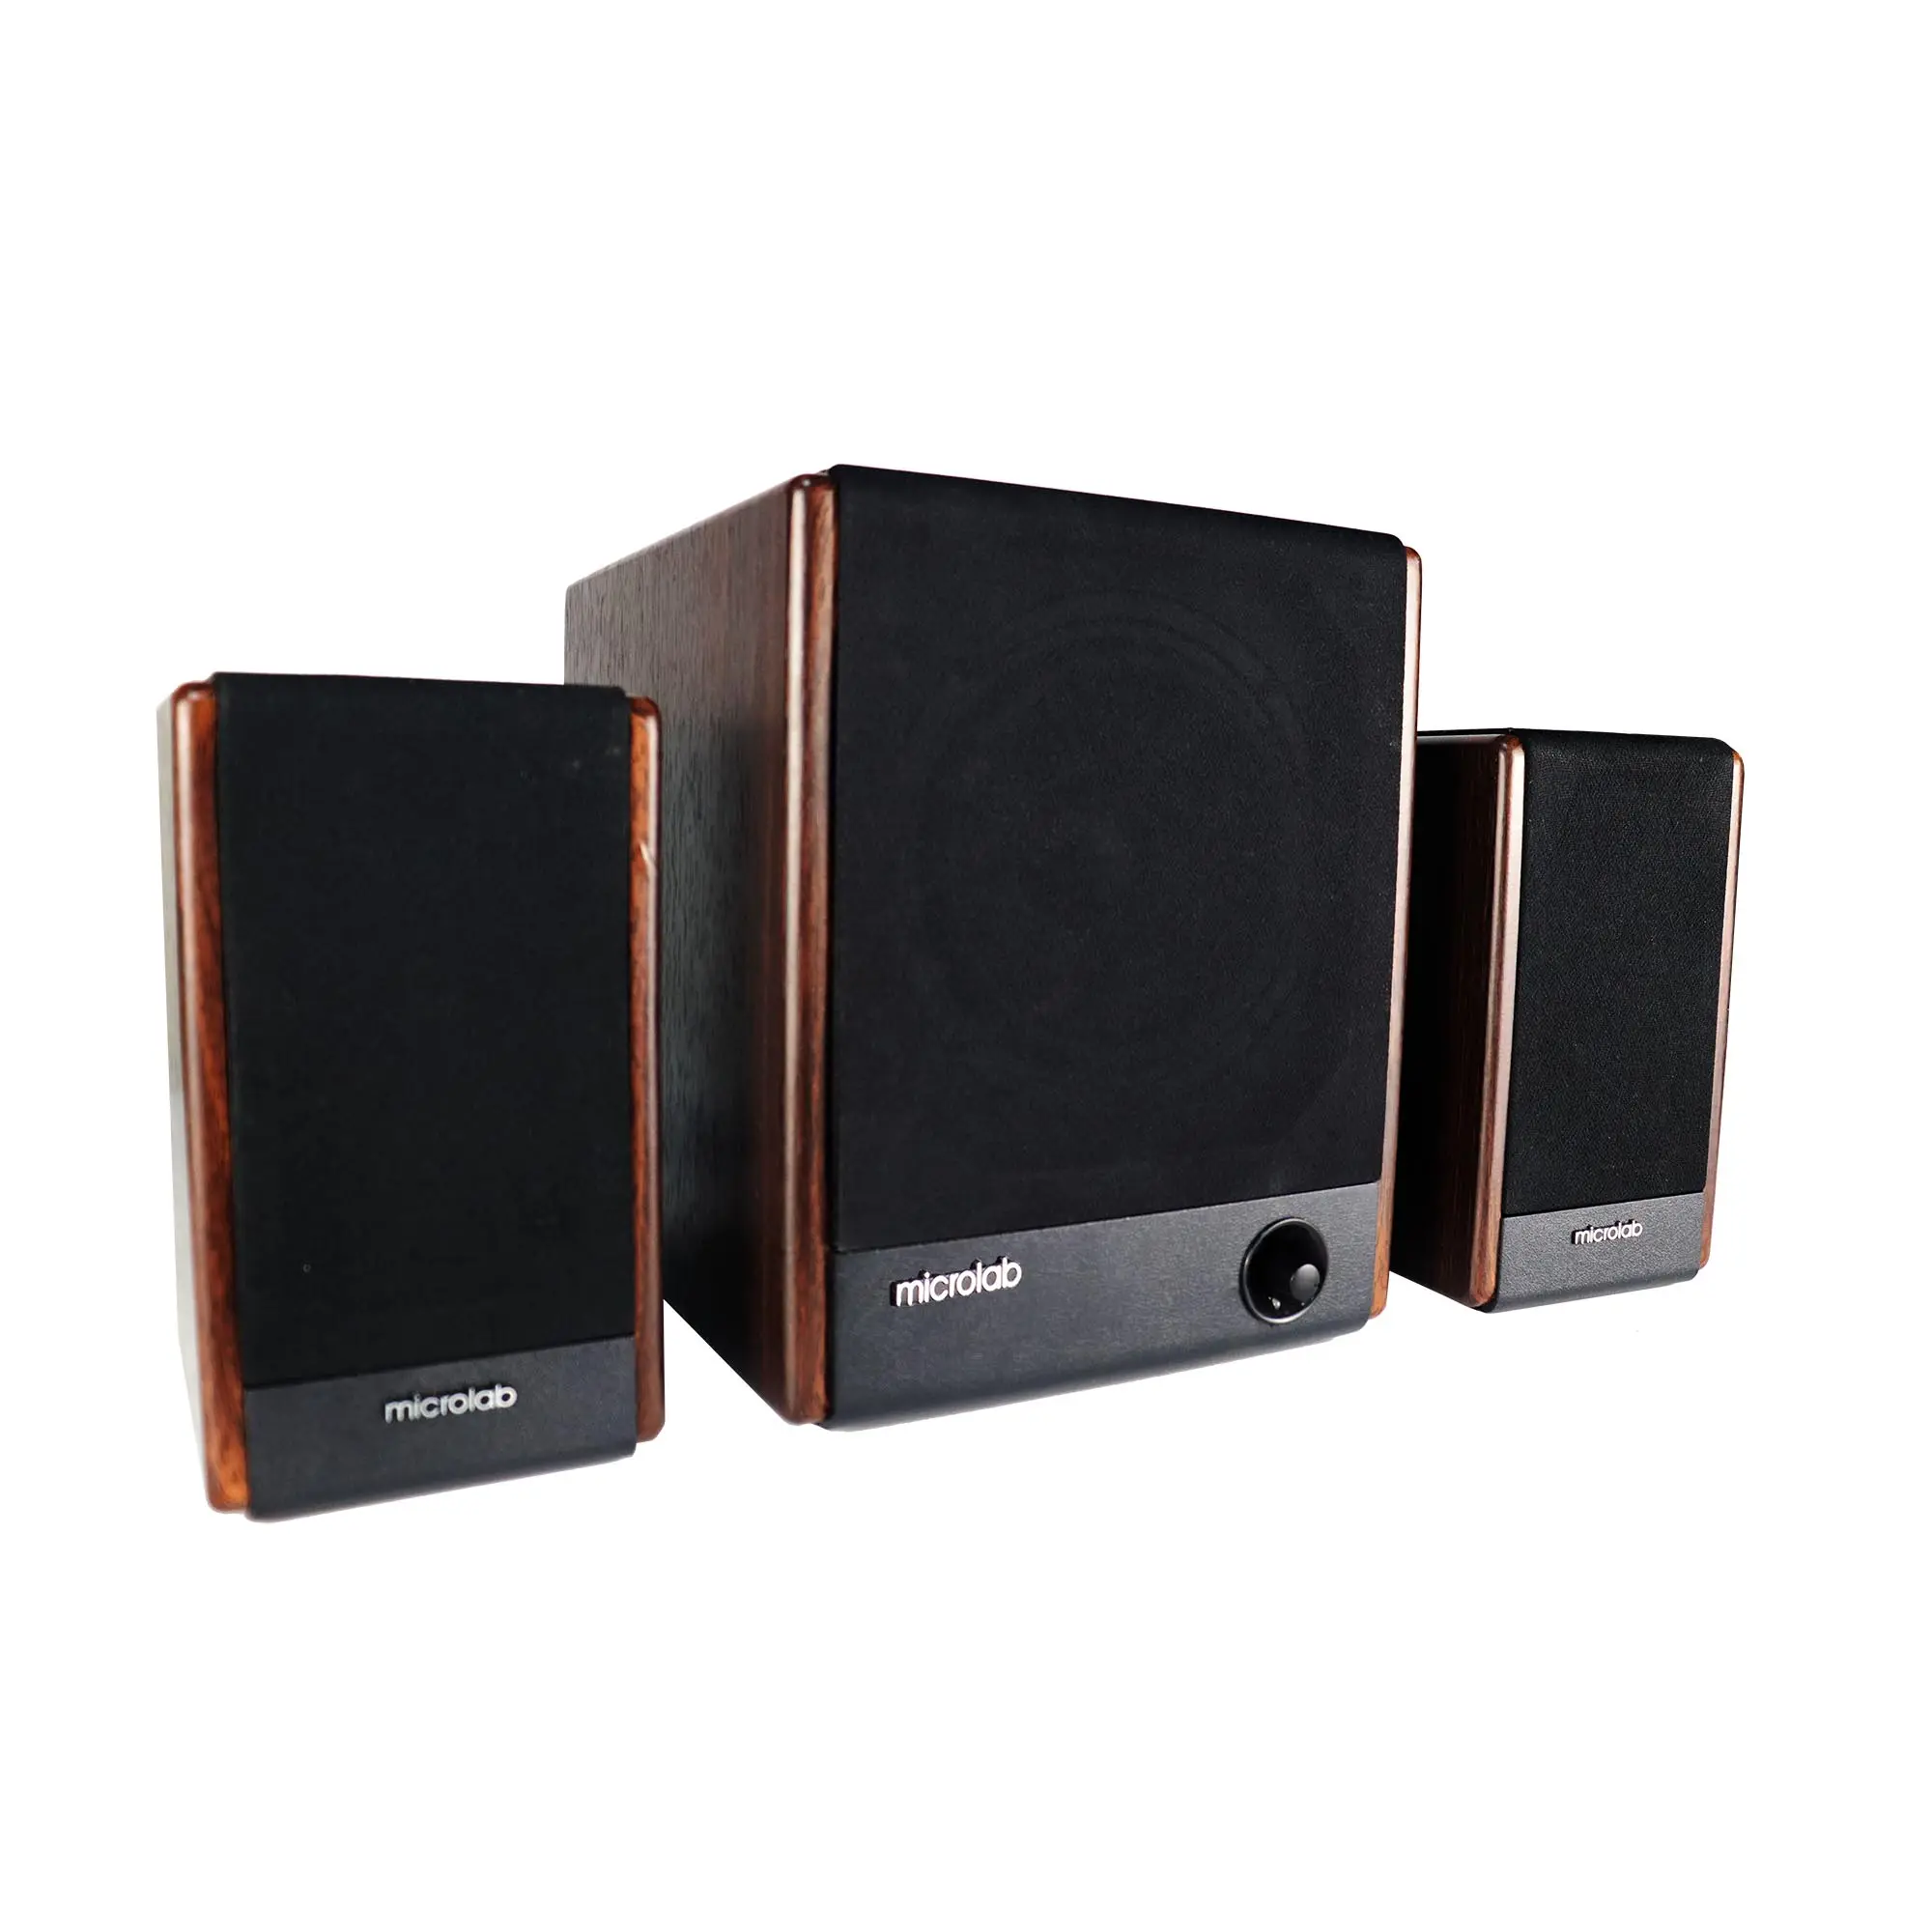 Microlab Hifi 2.1 blue tooth speaker FC330BT with wood cabinet